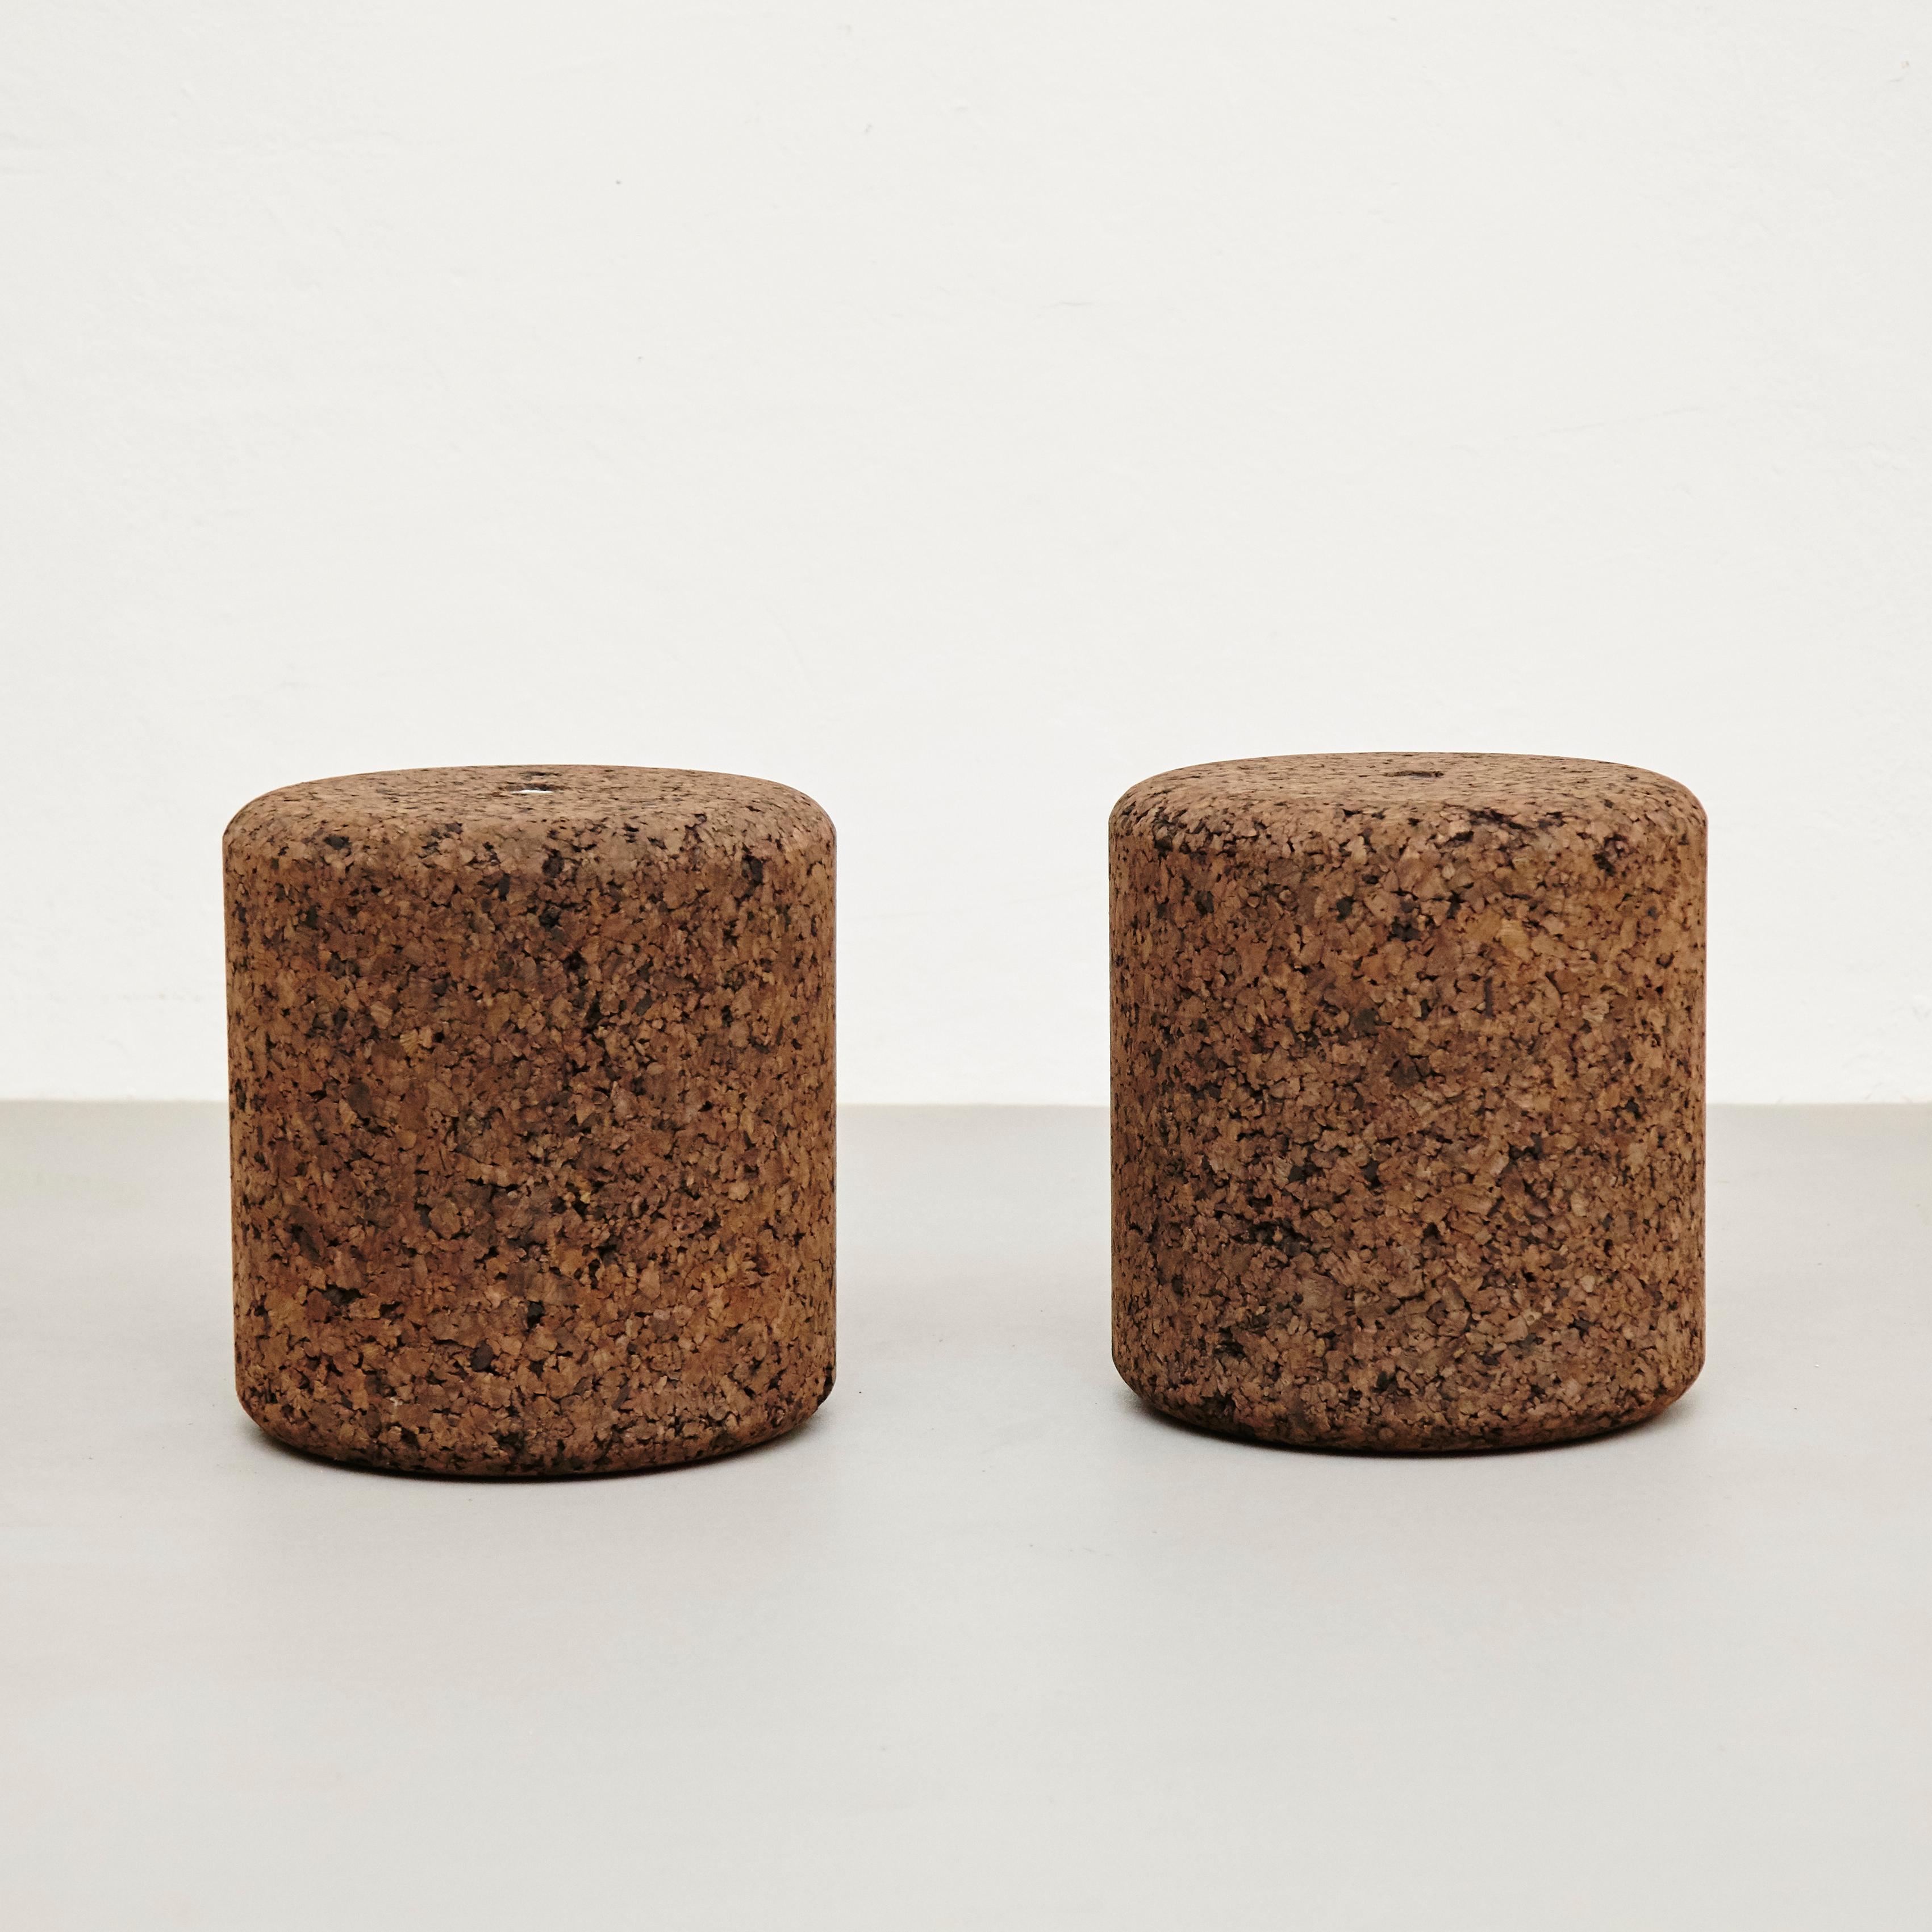 Set of two stools turned from agglomerate cork. Can be used as a small side table, a stool, or ottoman. Designed by Jasper Morrison in 2002 and manufactured by Moooi, Netherlands. In good original condition with minor wear consistent with age and